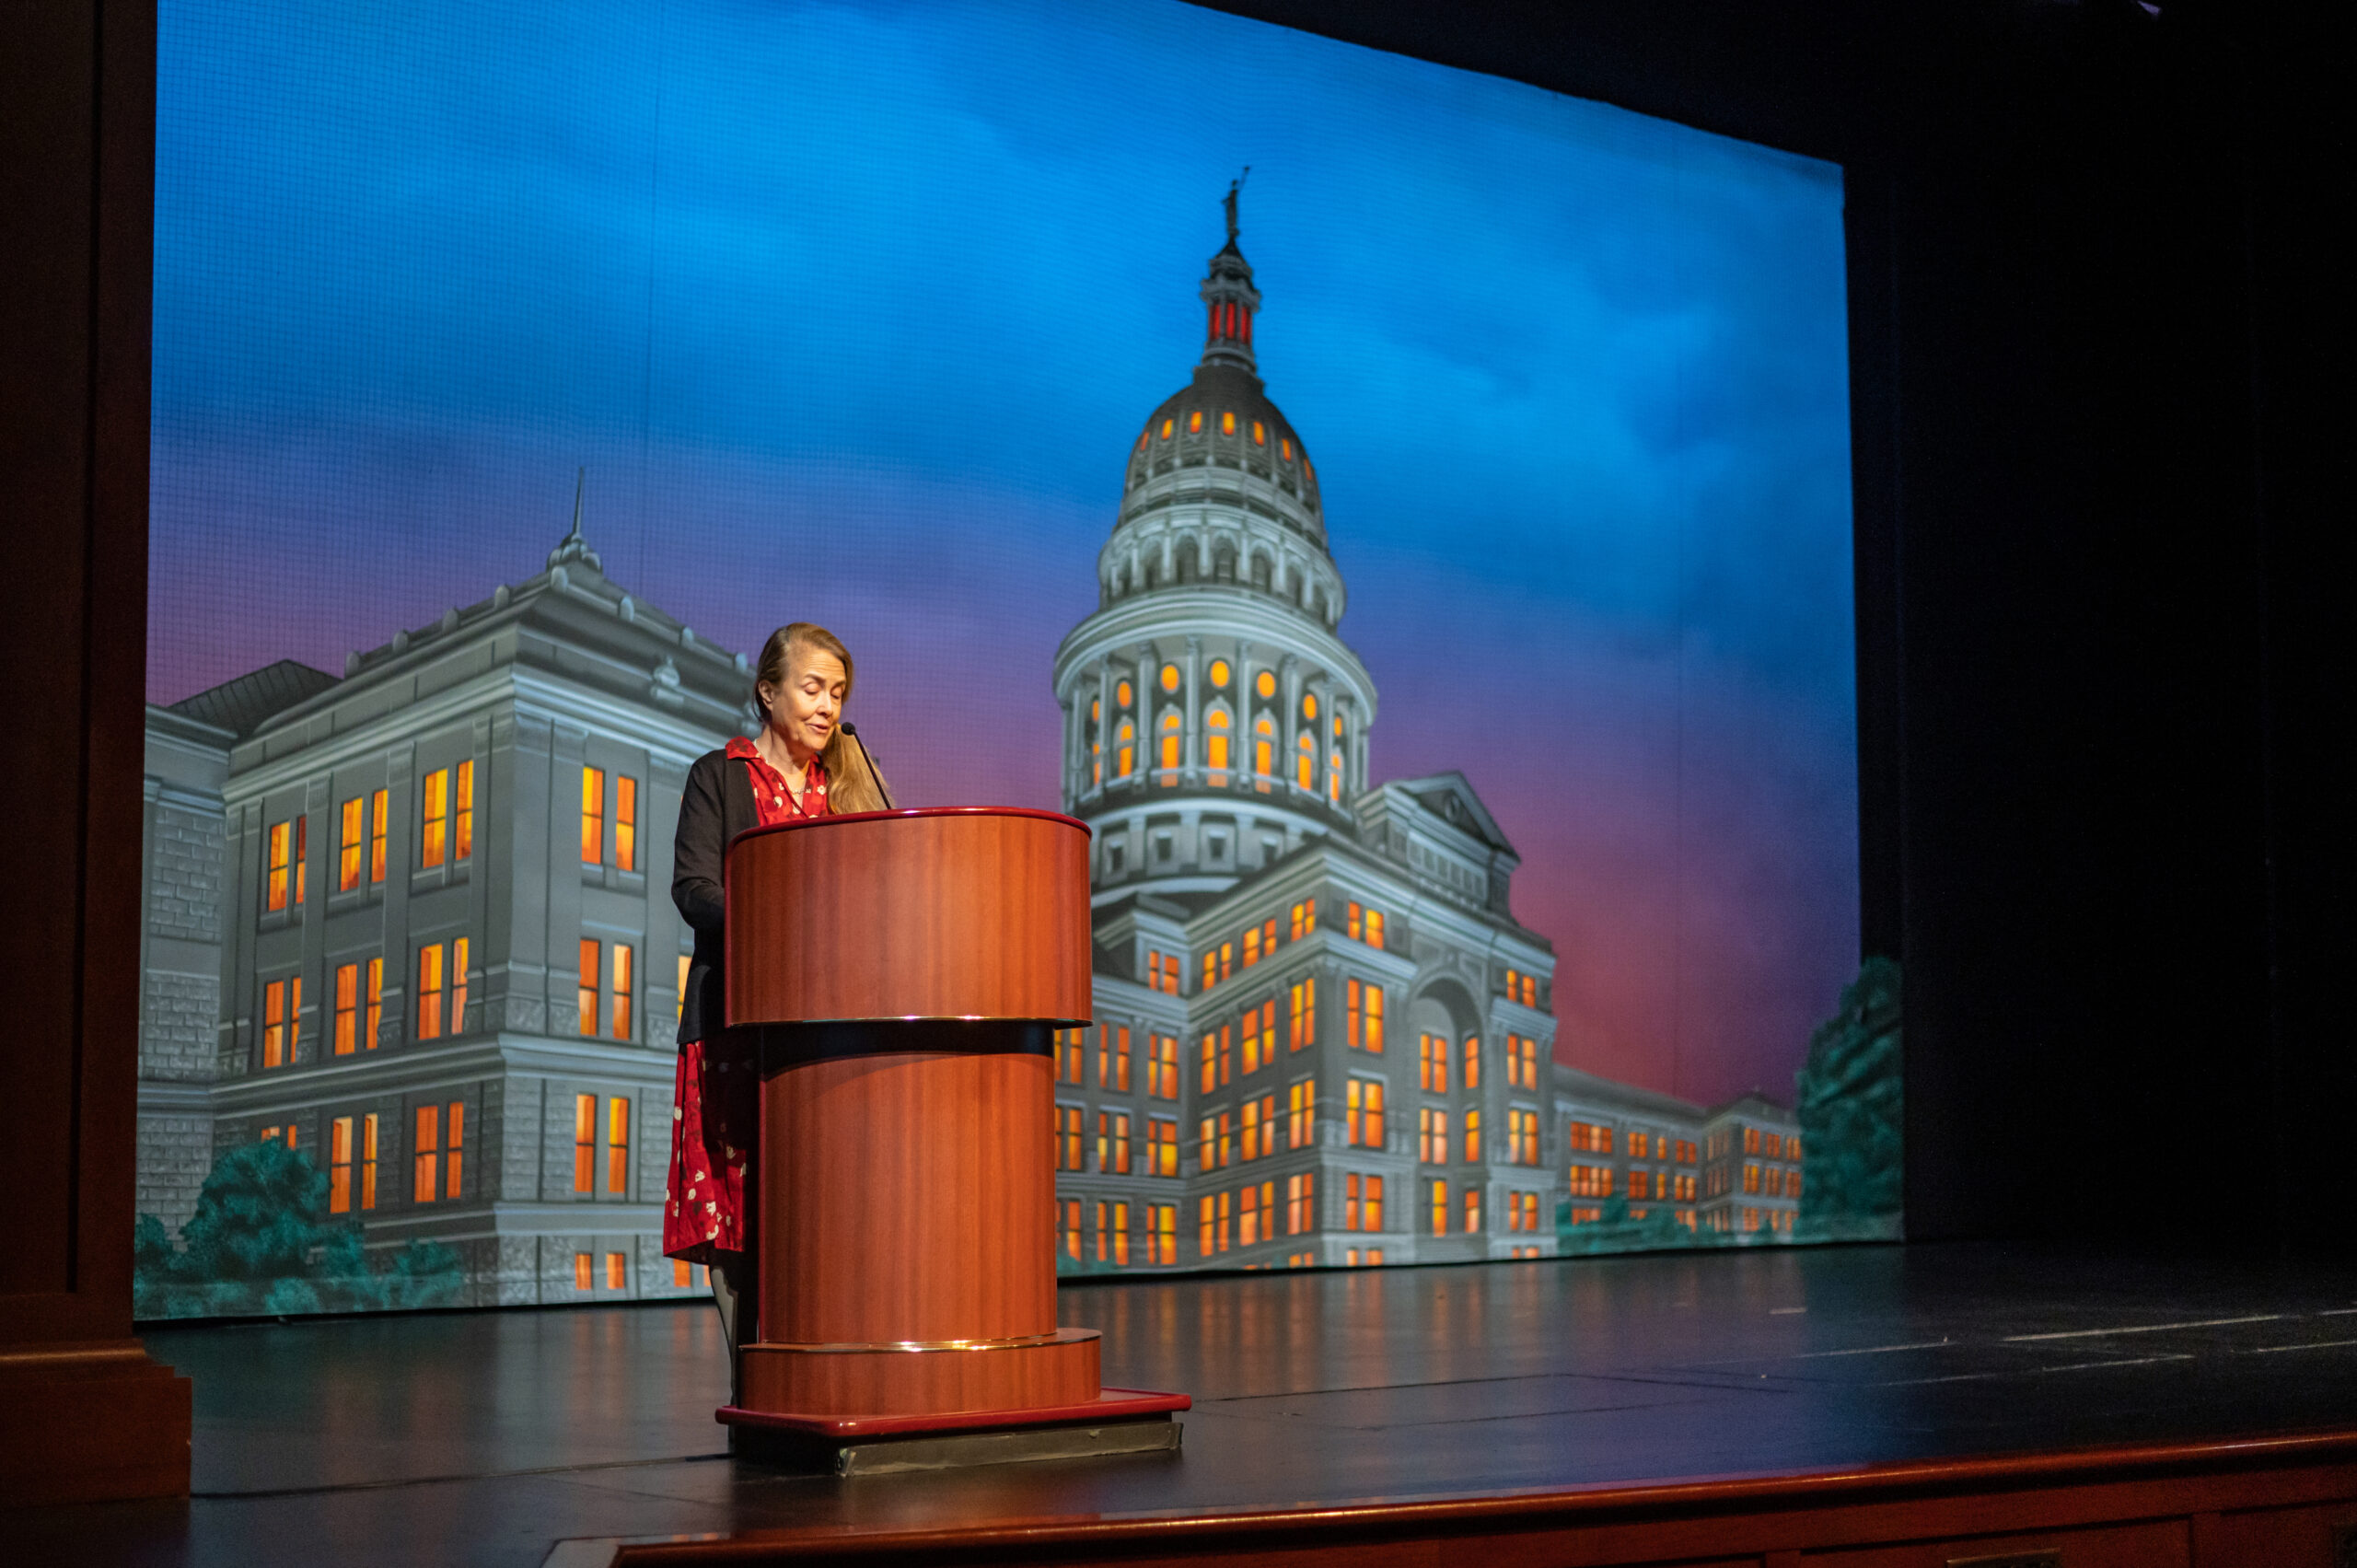 Naomi Shihab Nye, wearing a polka dot blouse under a blue suit jacket, speaks at a podium in front of a projection of the Texas Capitol building.